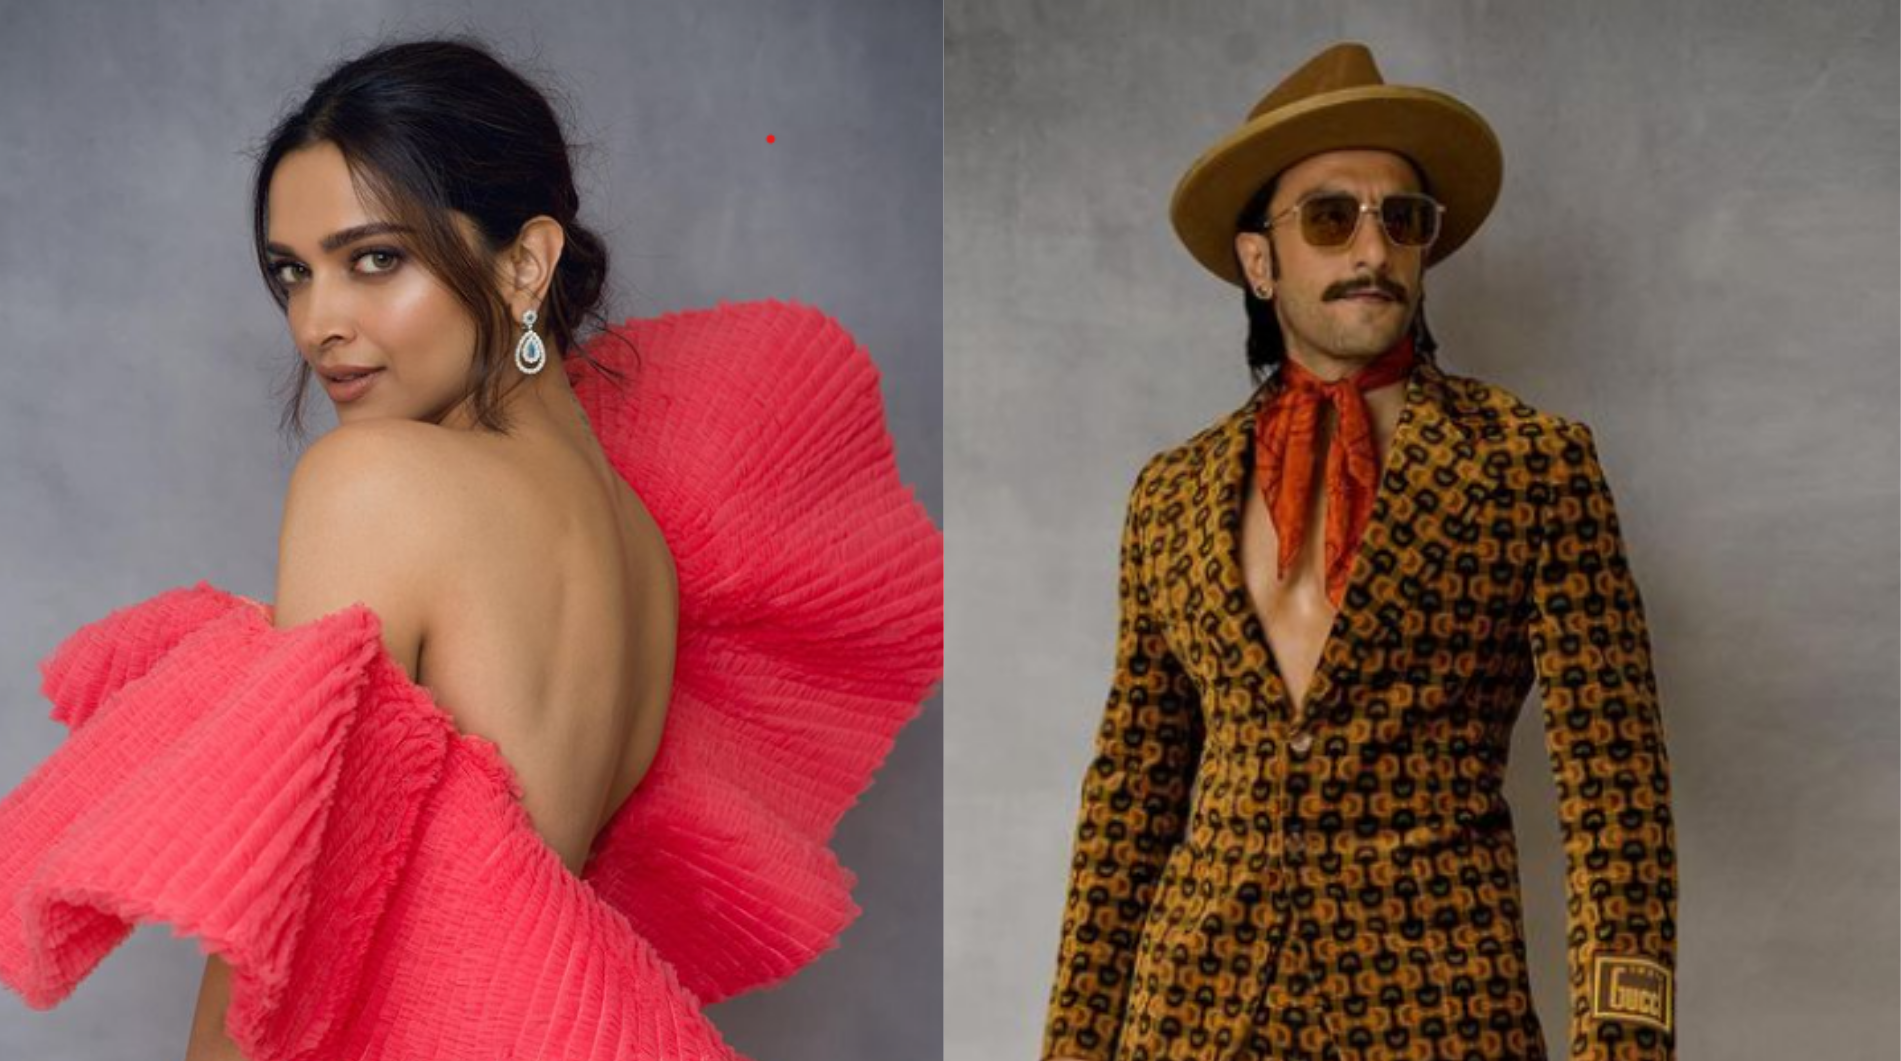 Deepika Padukone And Ranveer Singh Are Giving Us Major Fashion Goals As They Blaze Through The Promotions Of 83